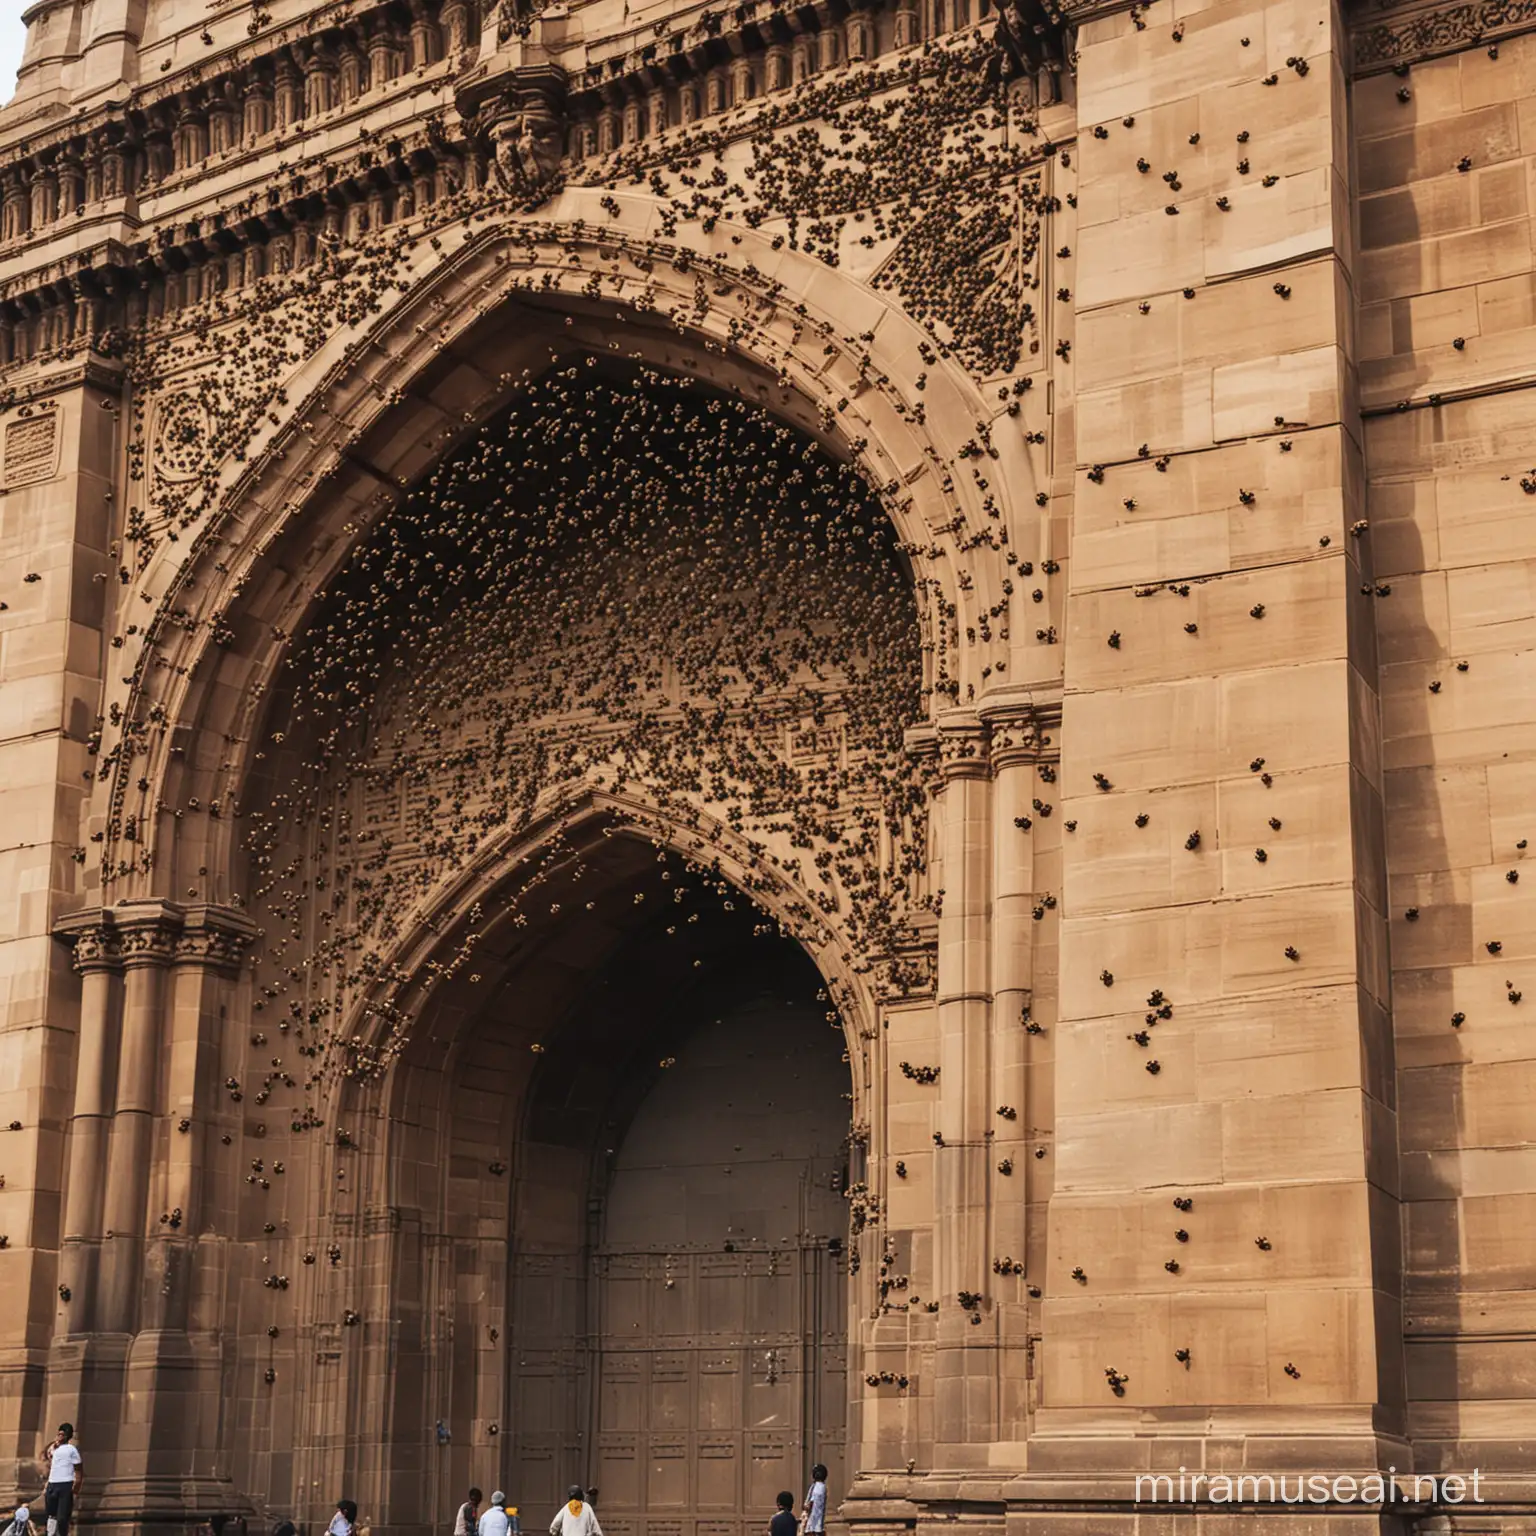 Bees Swarming Around the Majestic Gateway of India